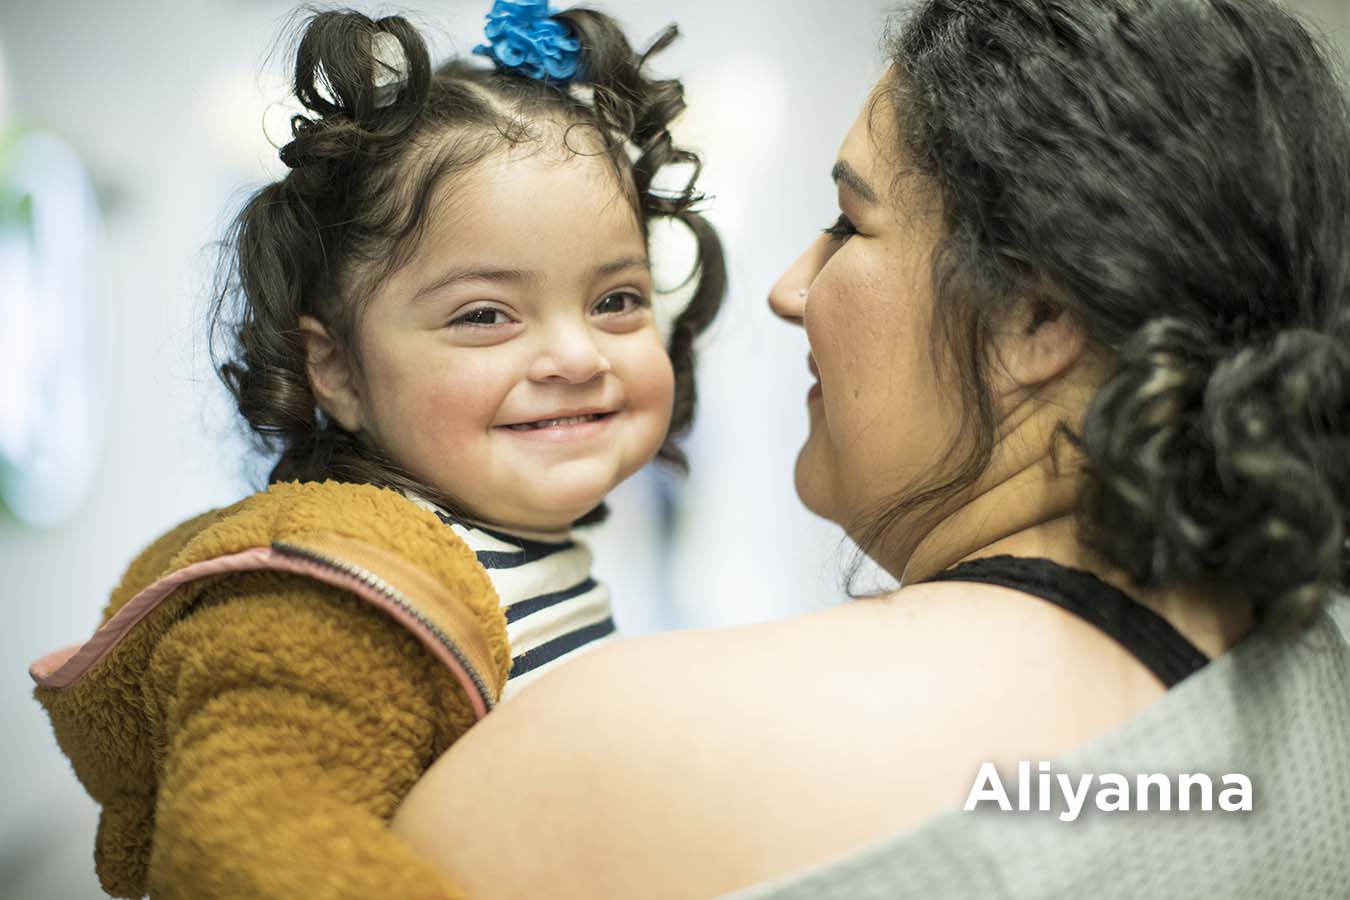 Aliyanna, a patient born with a fibrosarcoma tumor on her spine, and her mother